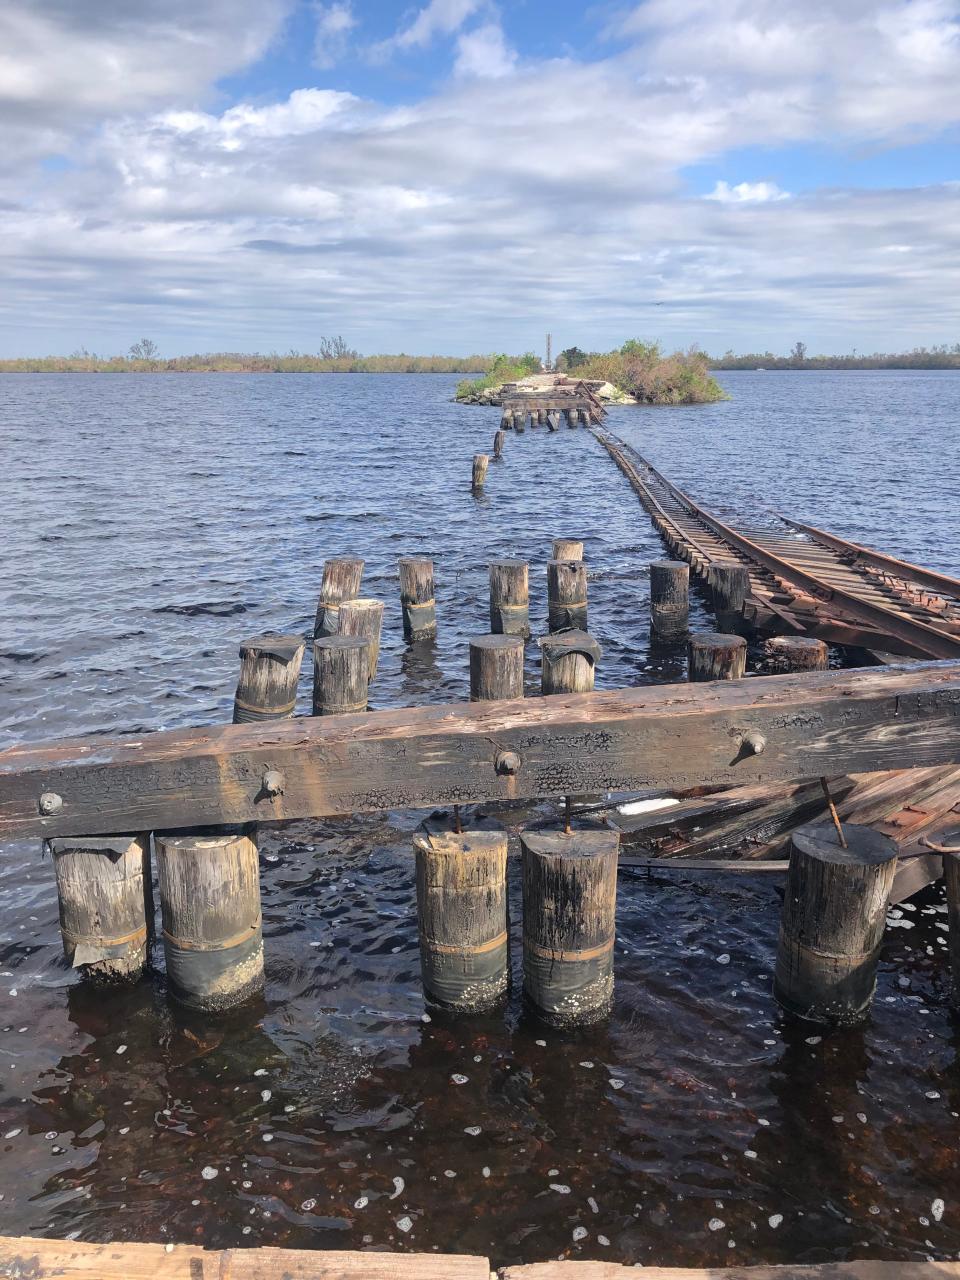 The train bridge crossing the Caloosahatchee River was significantly damaged by Hurricane Ian on Sept. 28, 2022.